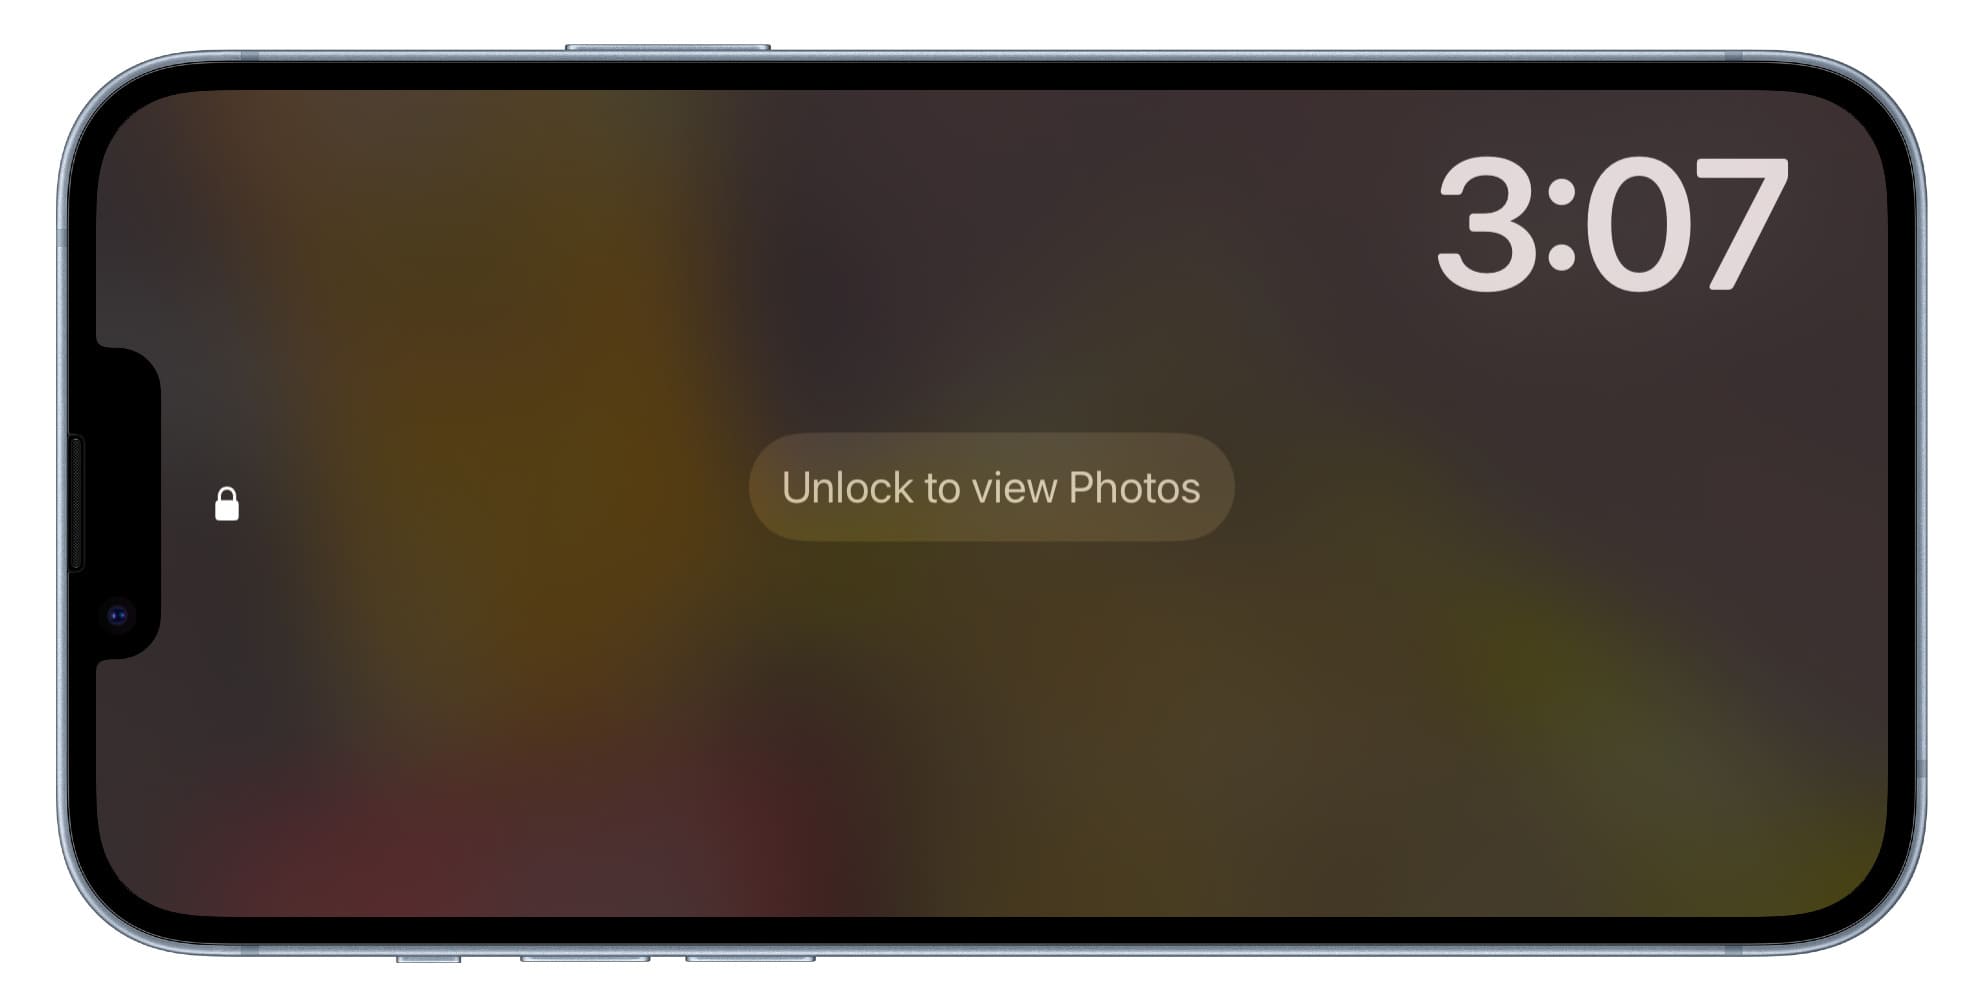 Unlock to view photos during StandBy on iPhone